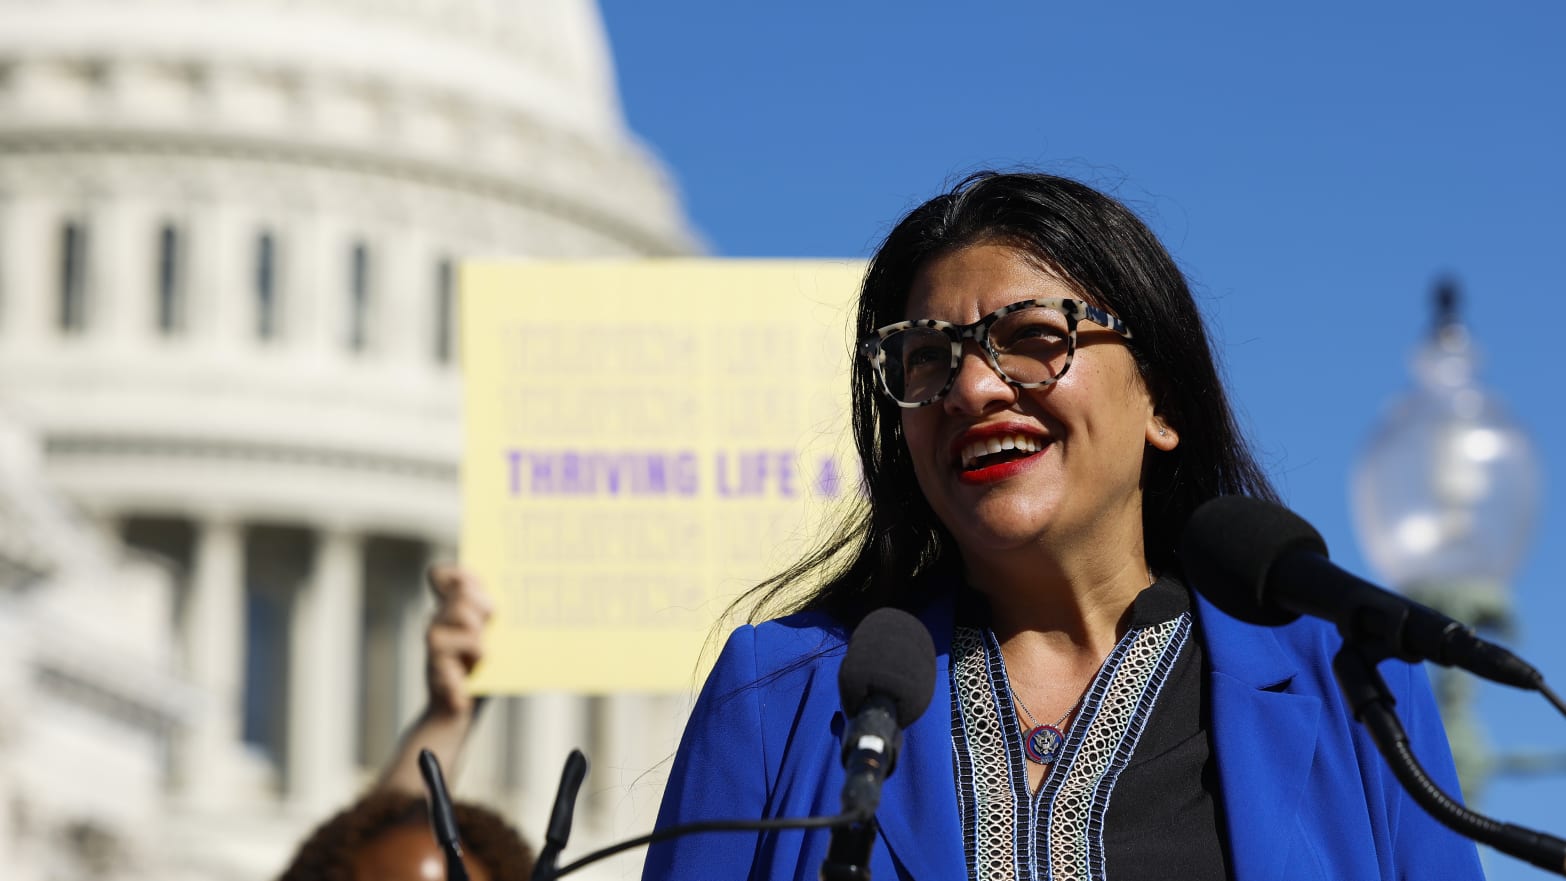 Rep. Rashida Tlaib (D-MI) speaks at a news conference outside the U.S. Capitol Building